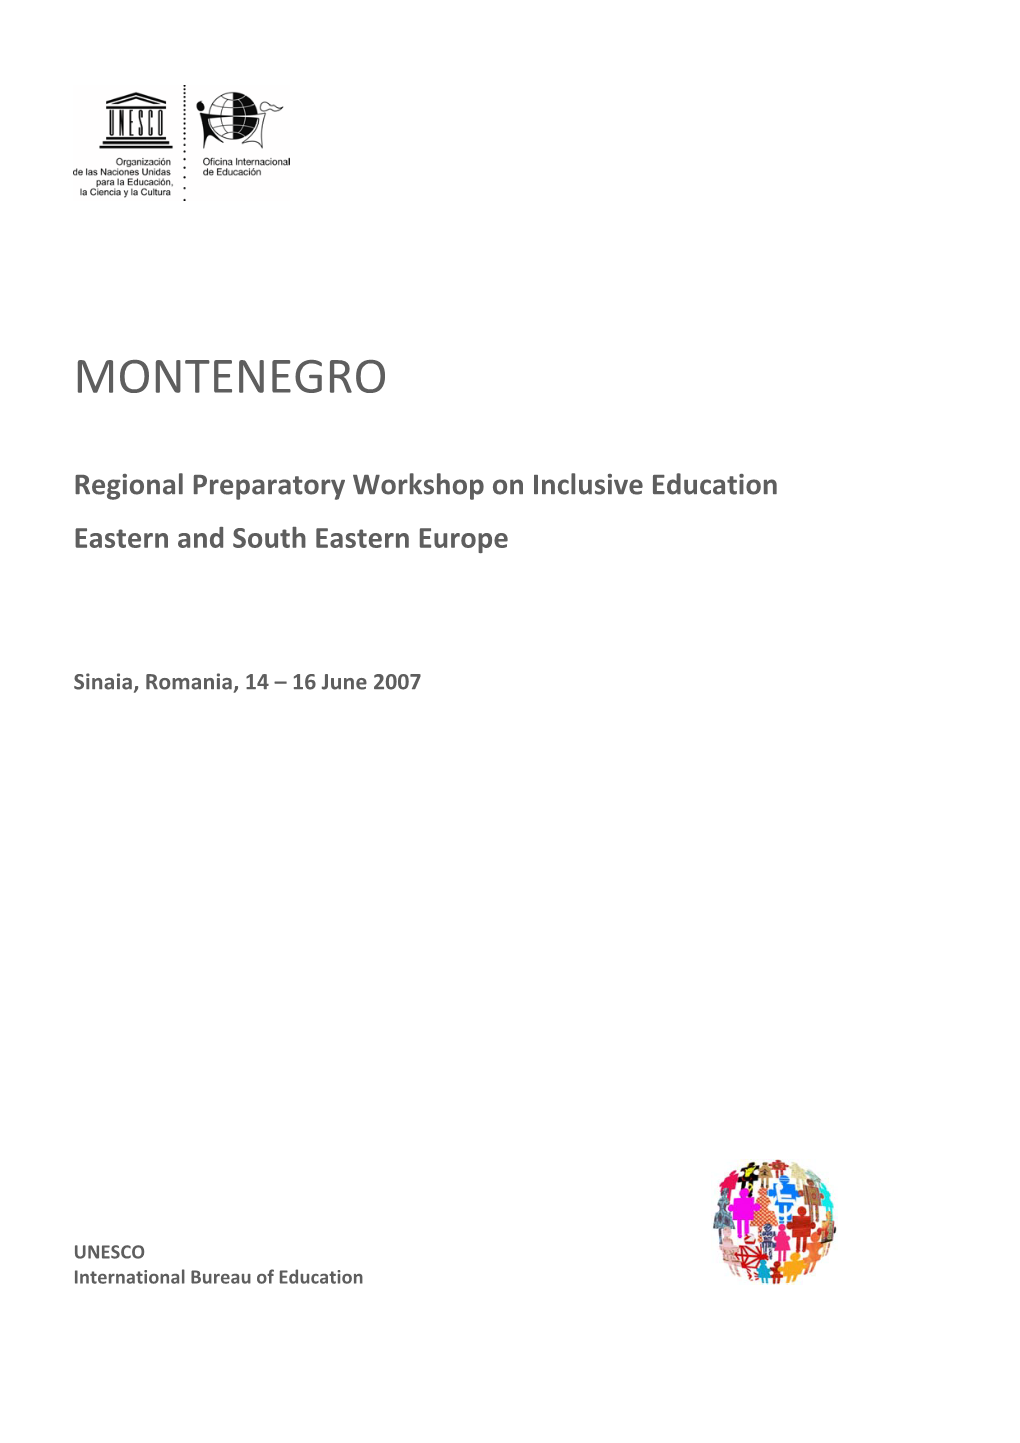 Education of Children with Special Needs in Montenegro